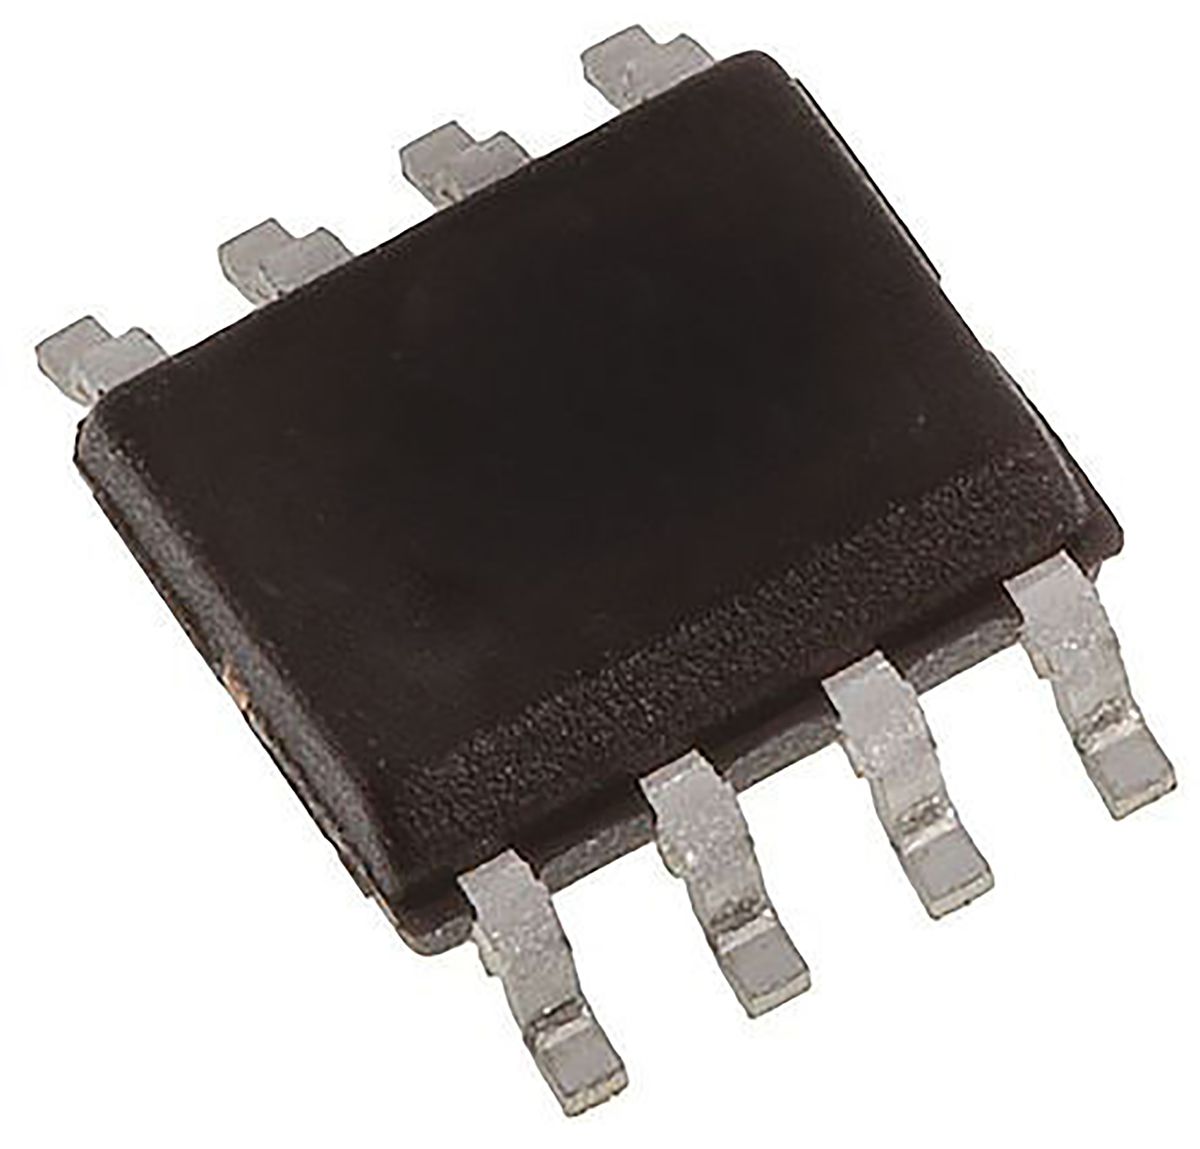 OP1177ARZ-REEL7 Analog Devices, Op Amp, 1.3MHz 1 kHz, 8-Pin SOIC